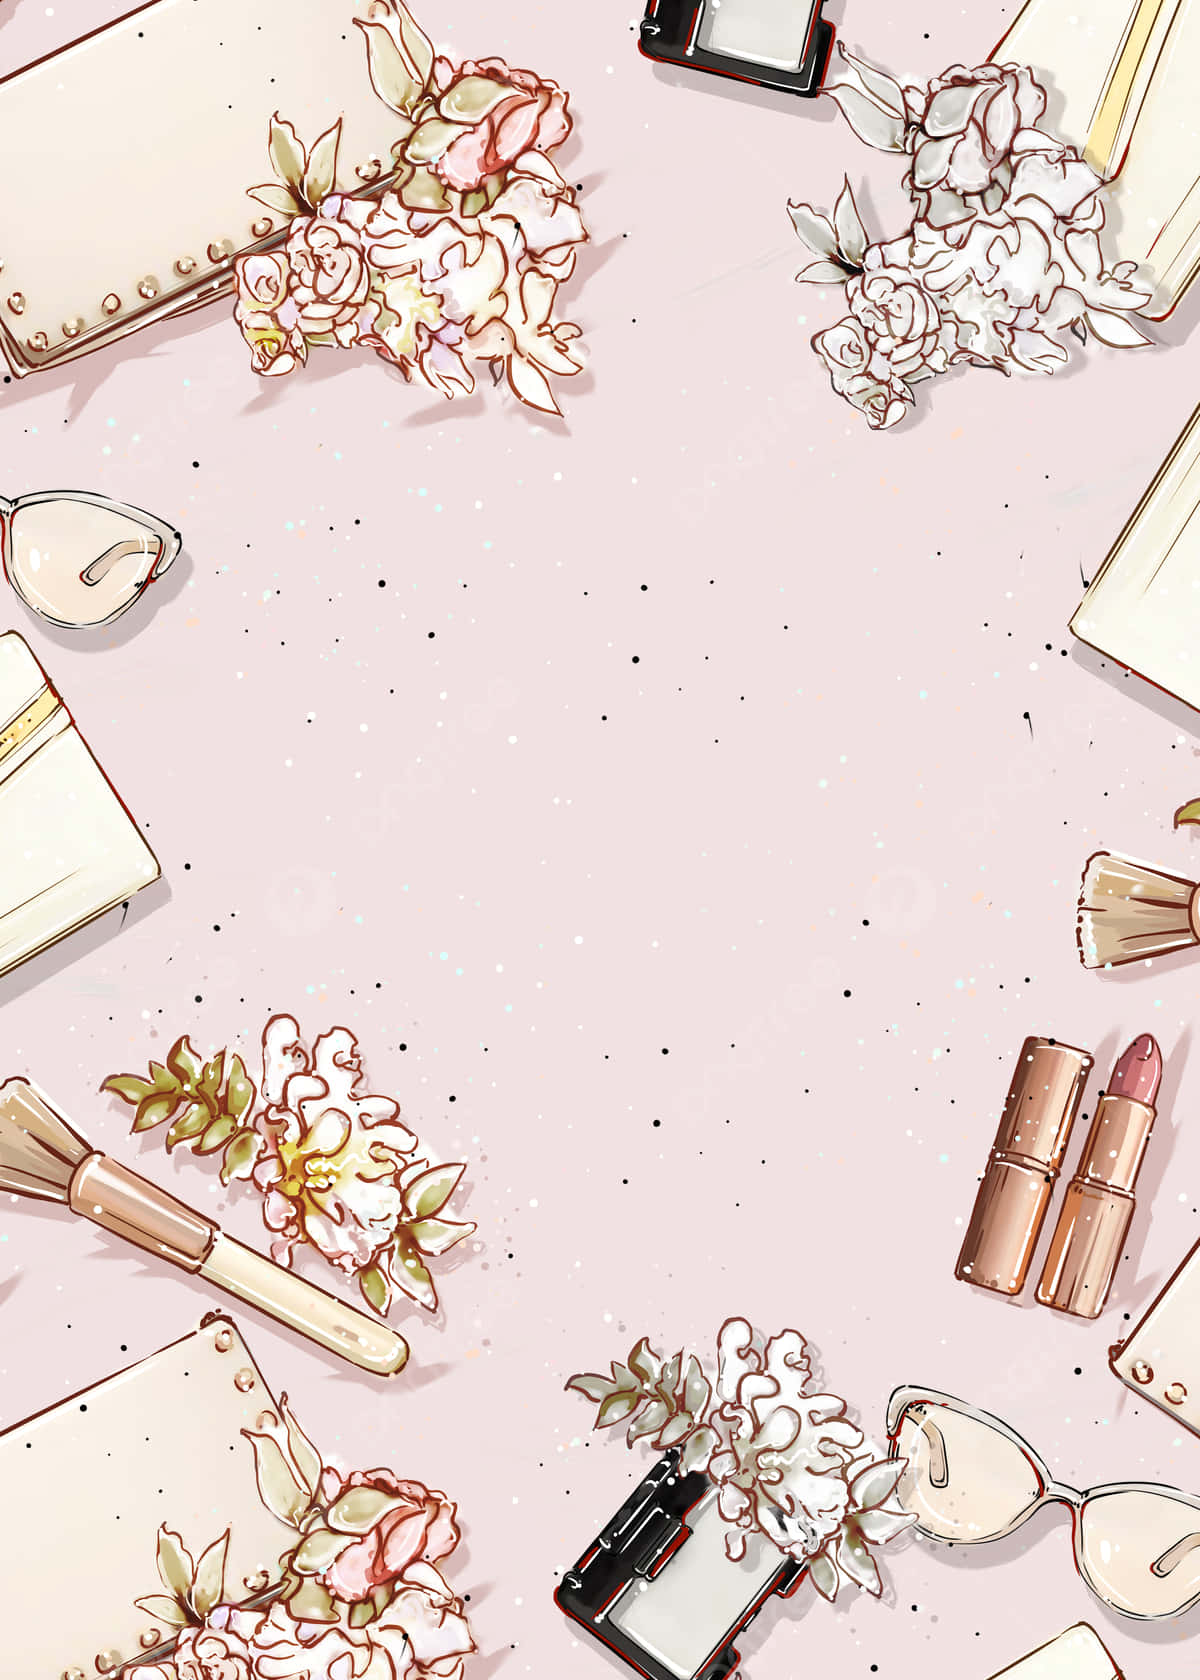 Floral Makeup Aesthetic Background Wallpaper